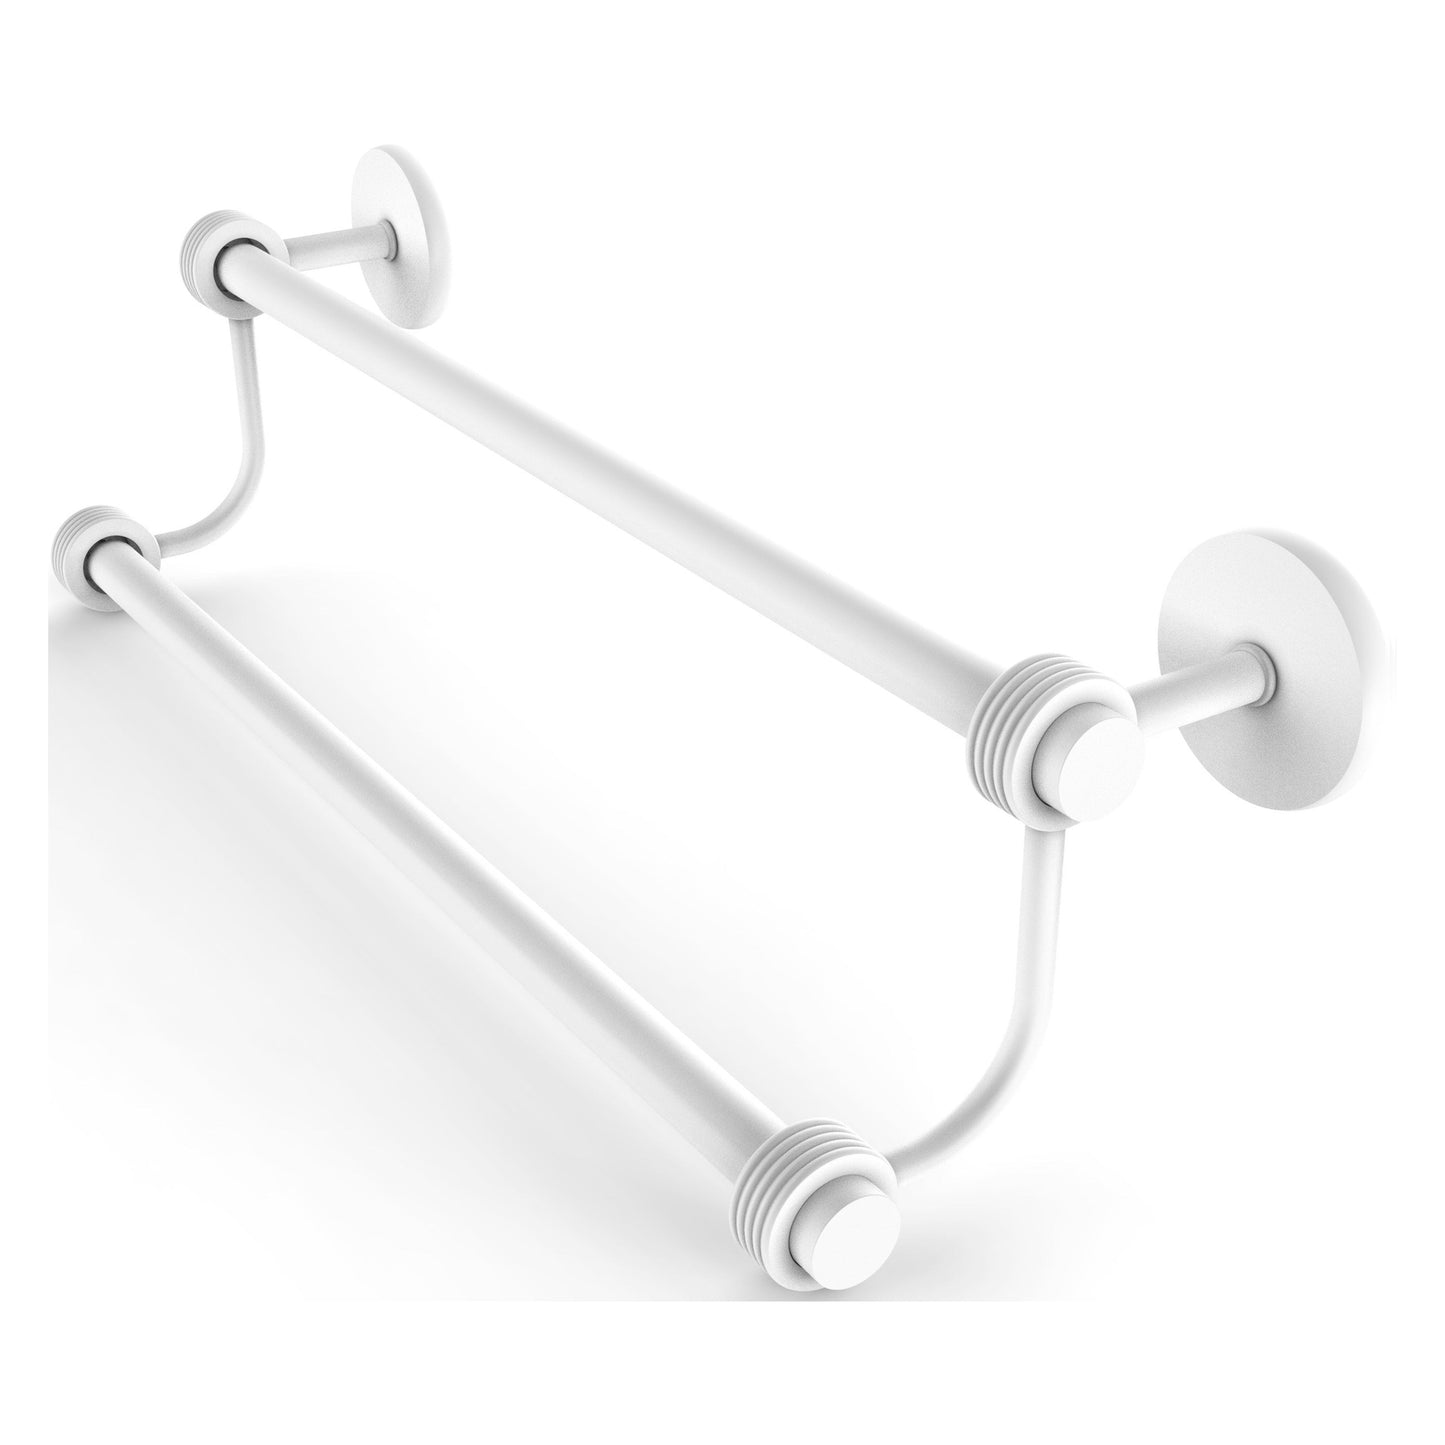 Allied Brass Satellite Orbit Two 18" x 20.5" Matte White Solid Brass Double Towel Bar With Grooved Accent